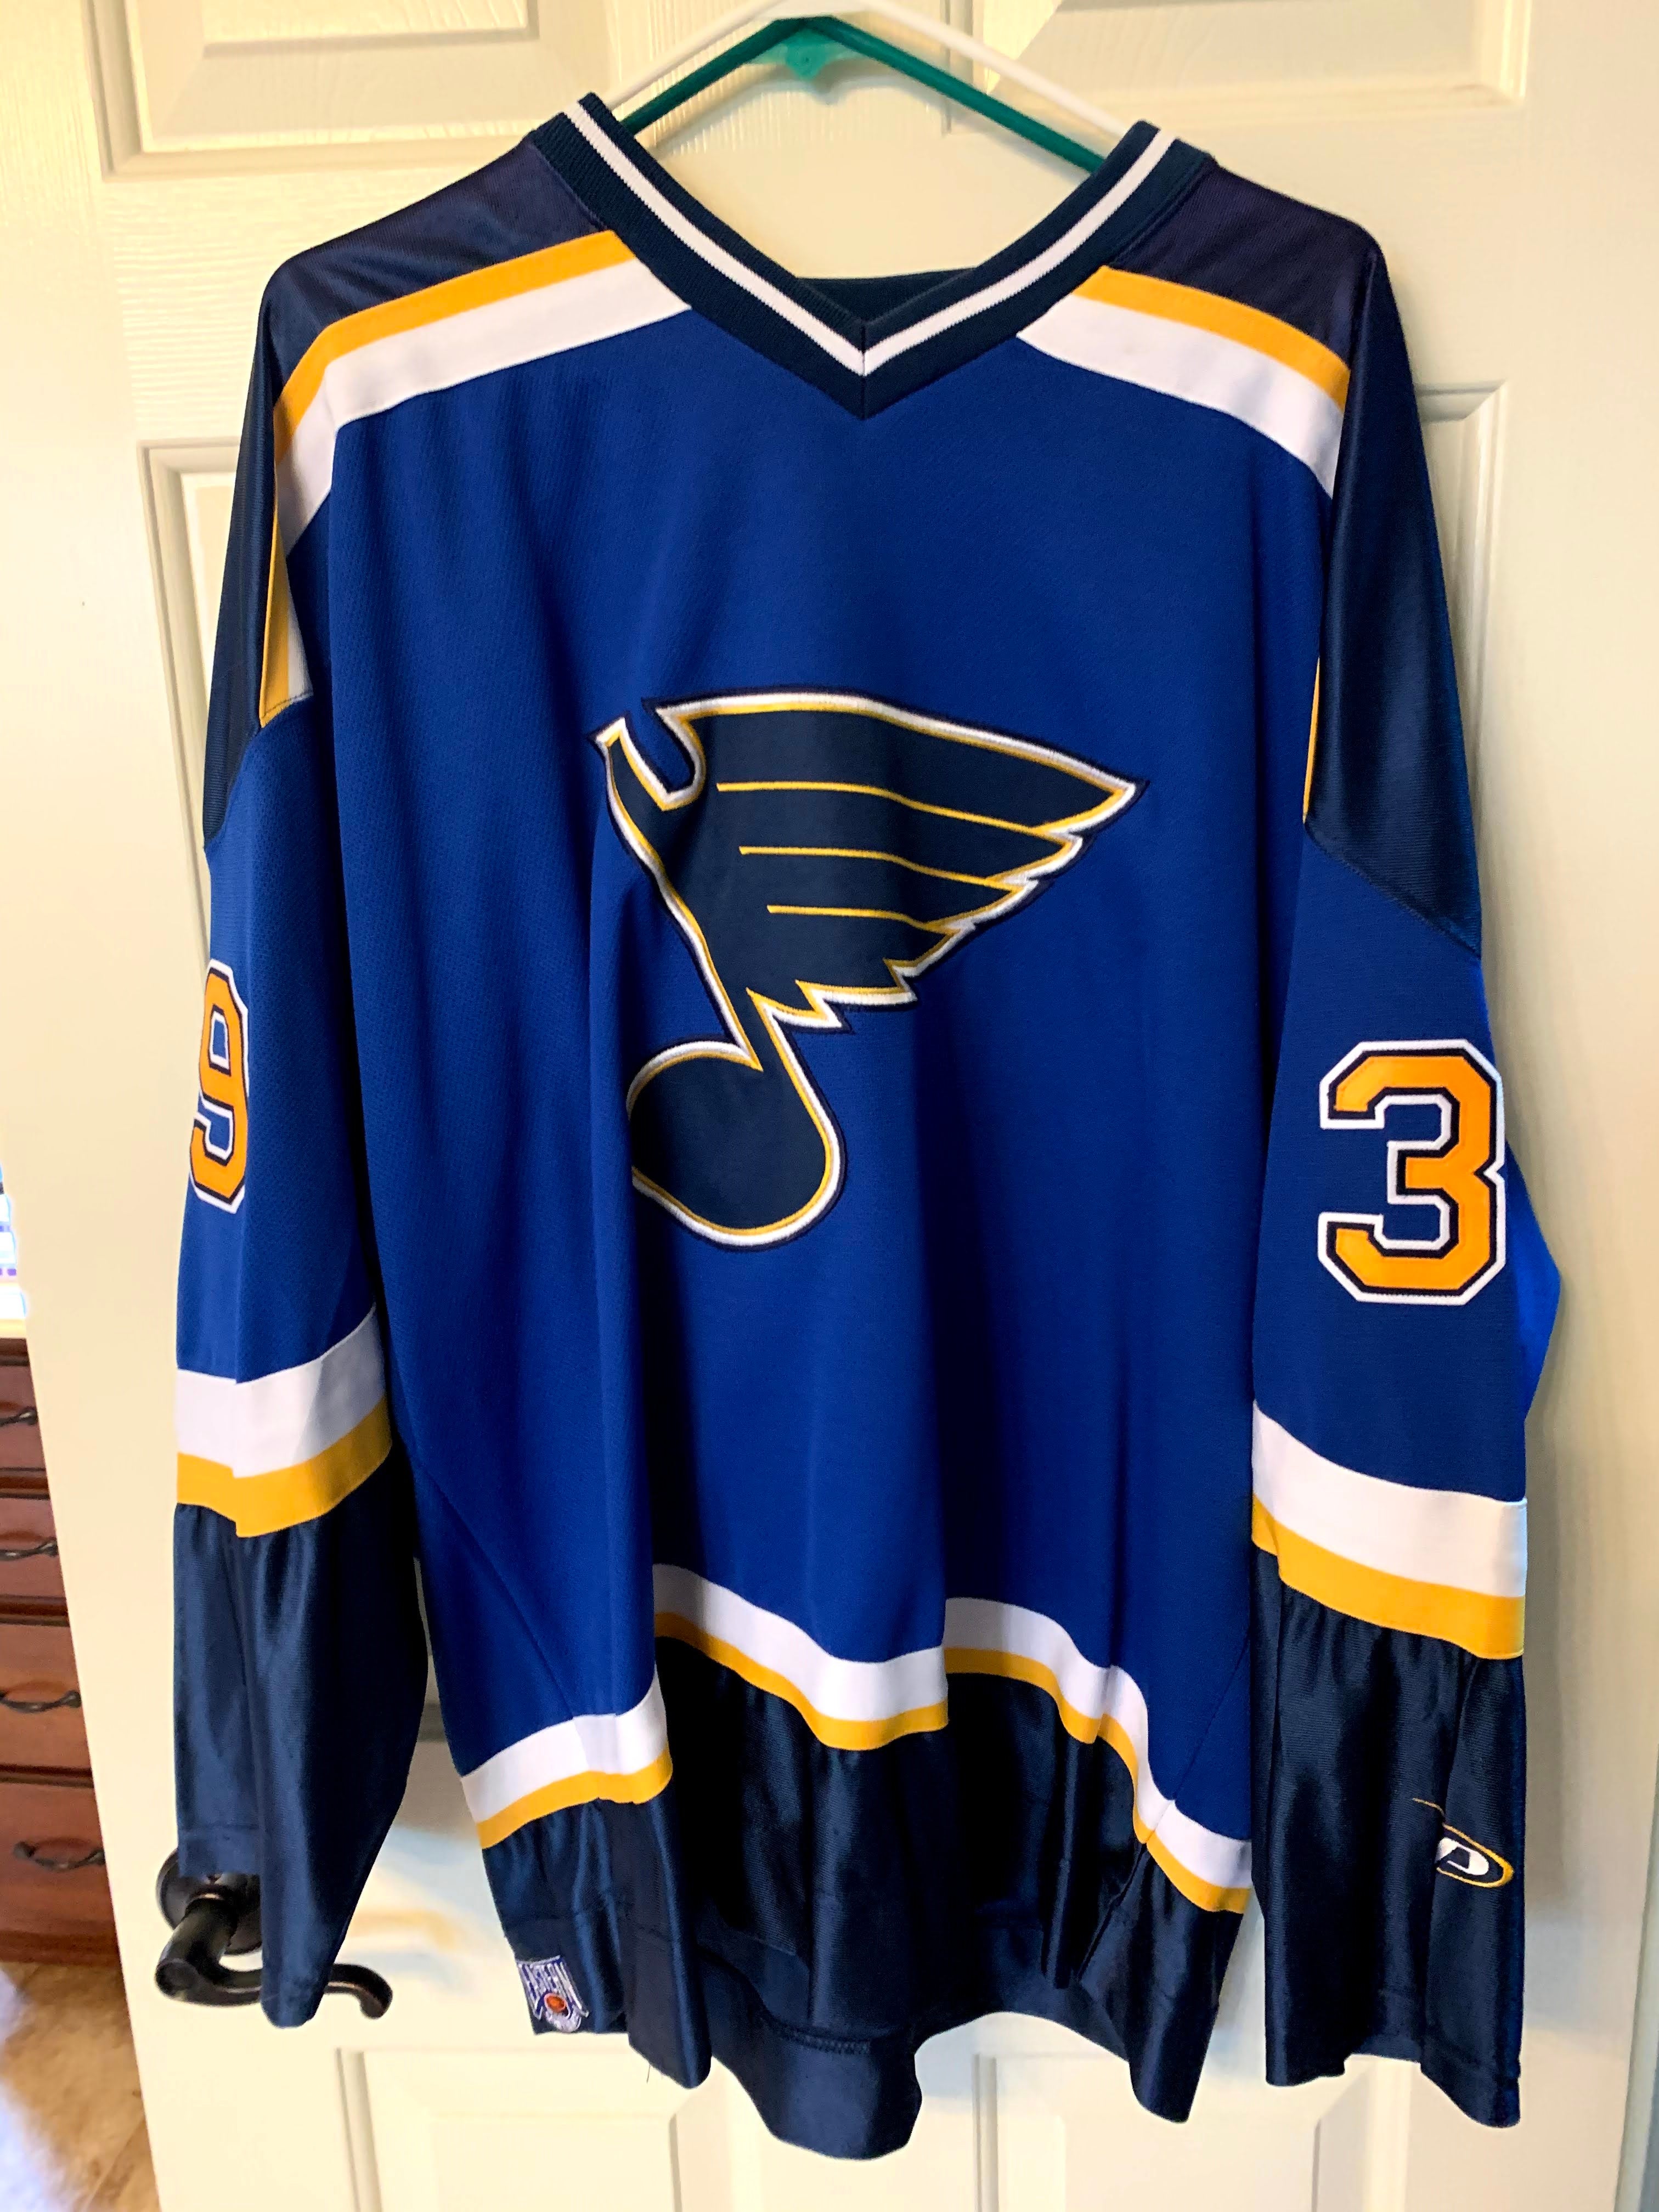 1999-00 Taco Bell St Louis Blues Kelly Chase #19